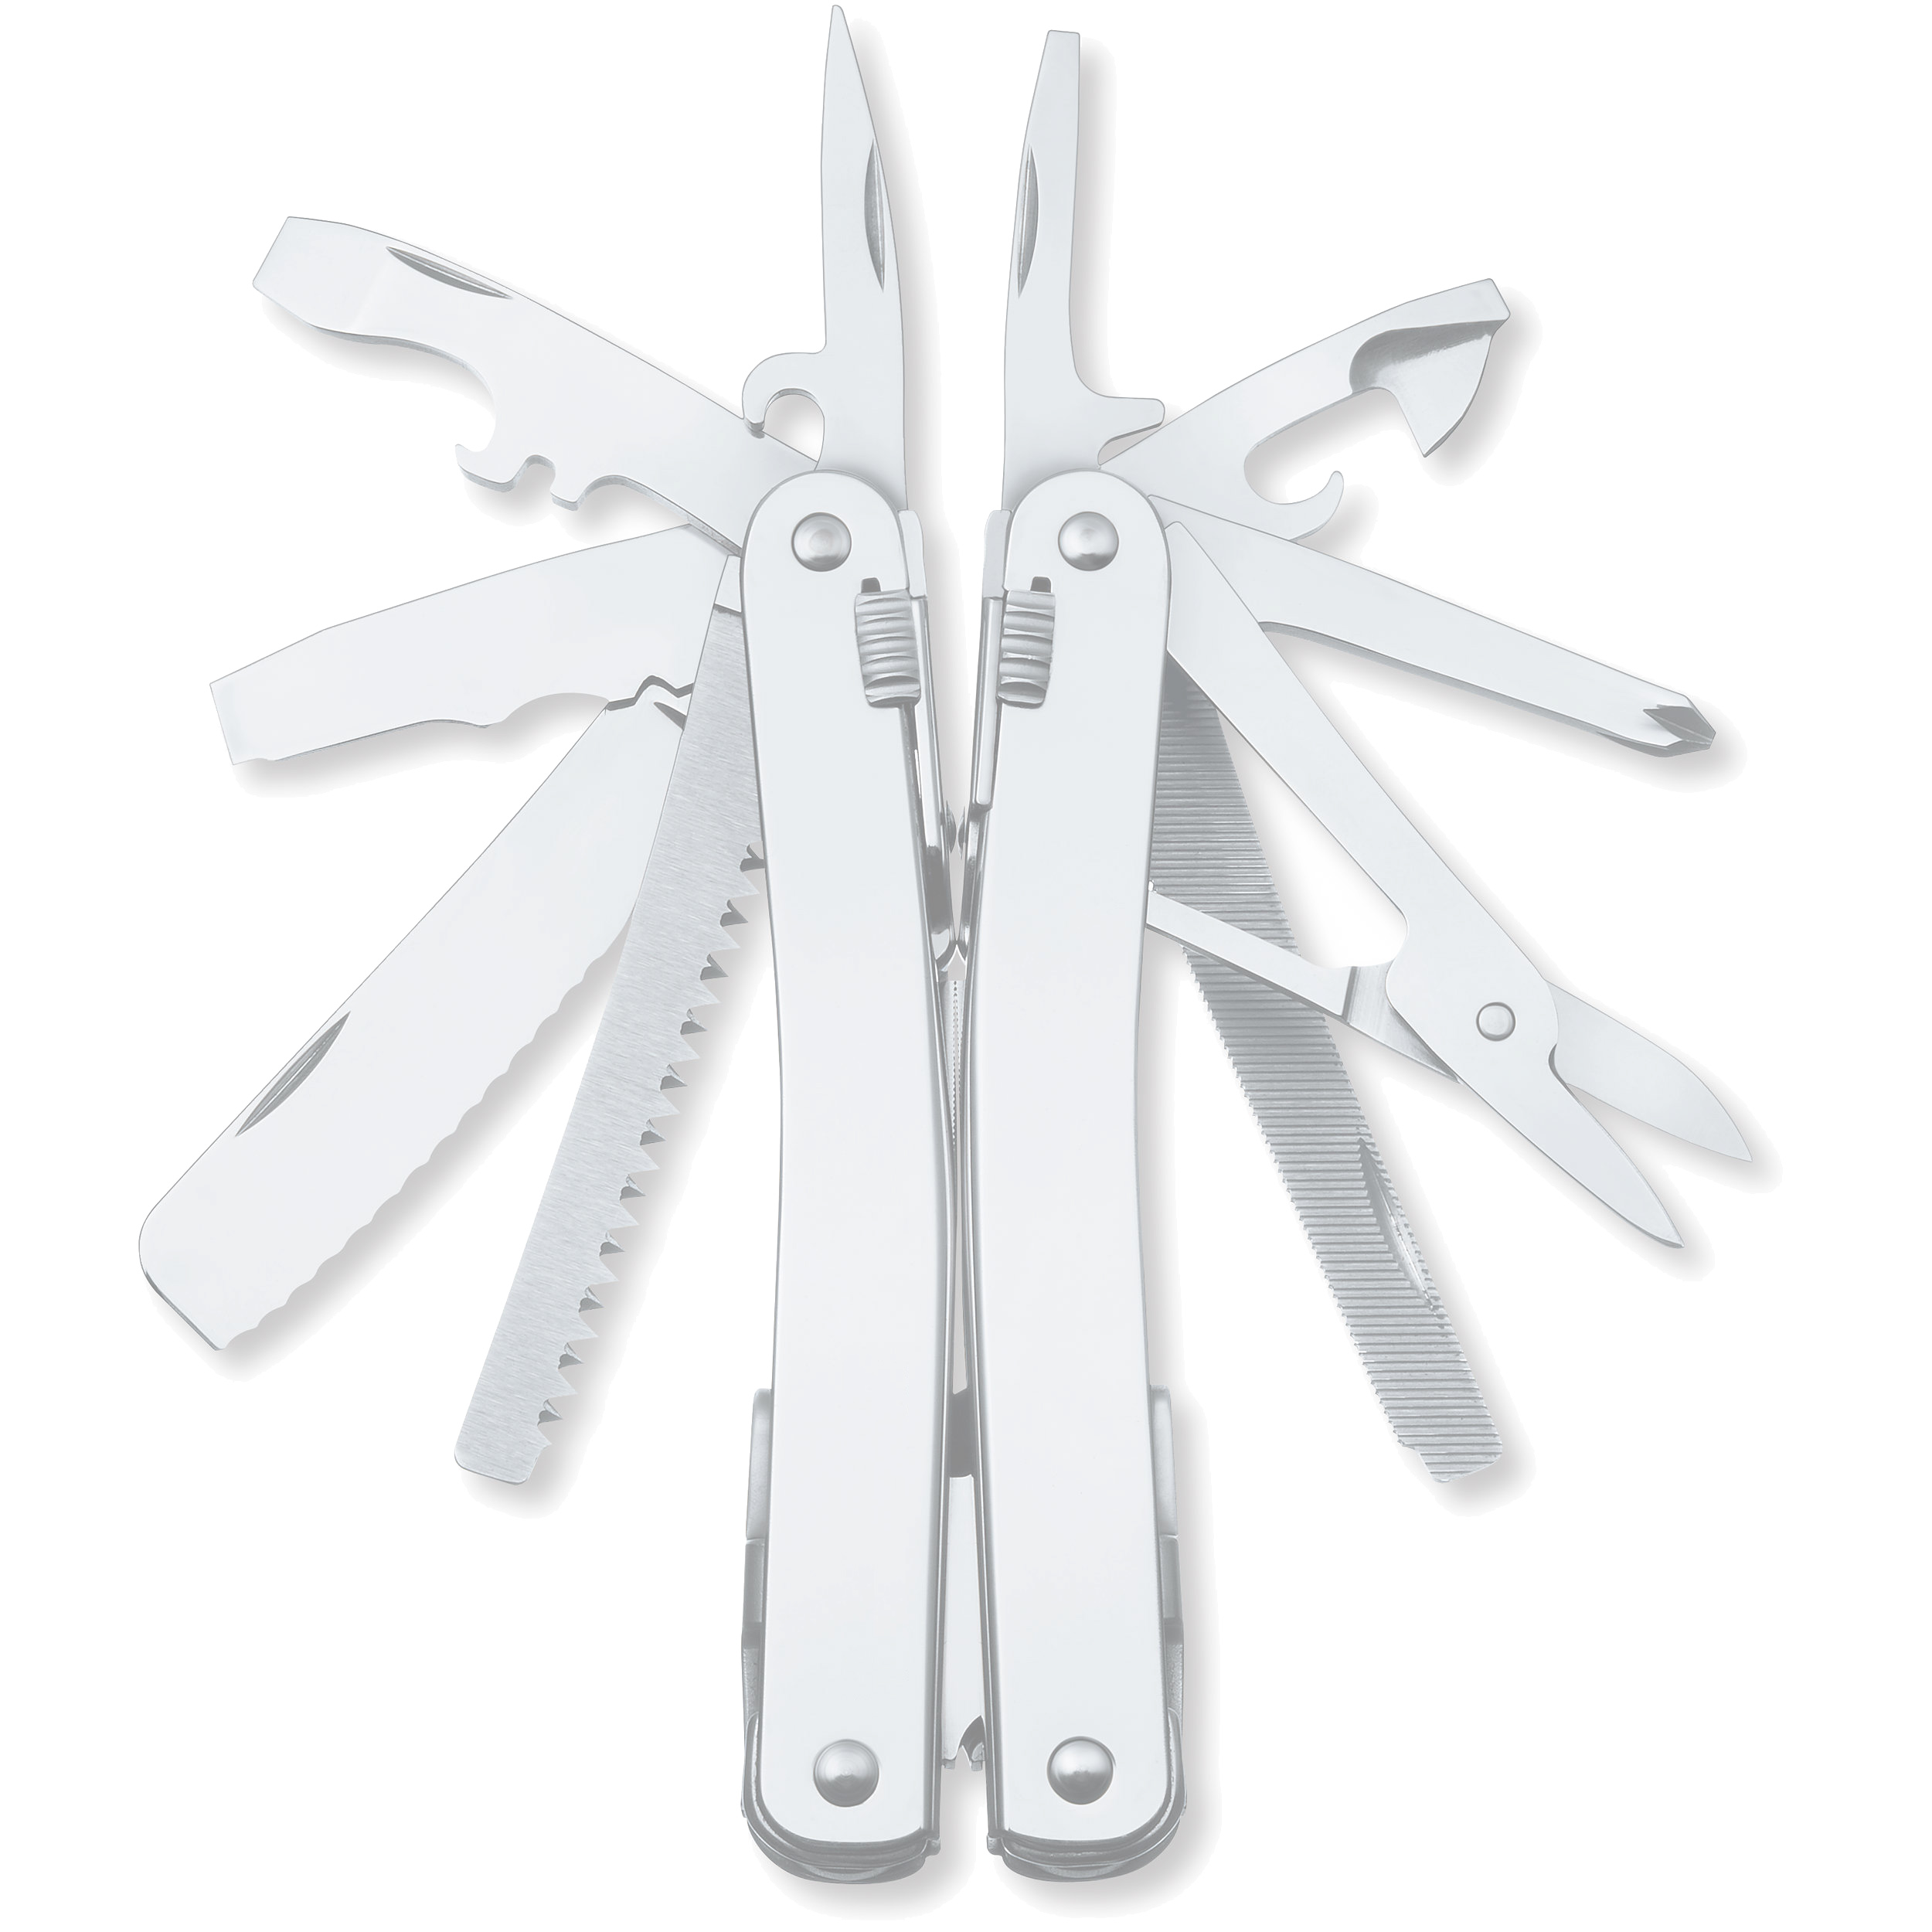 Image of a metal multitool with the different hinged tools pulled out: scissors, screwdrivers, saws, files, and more